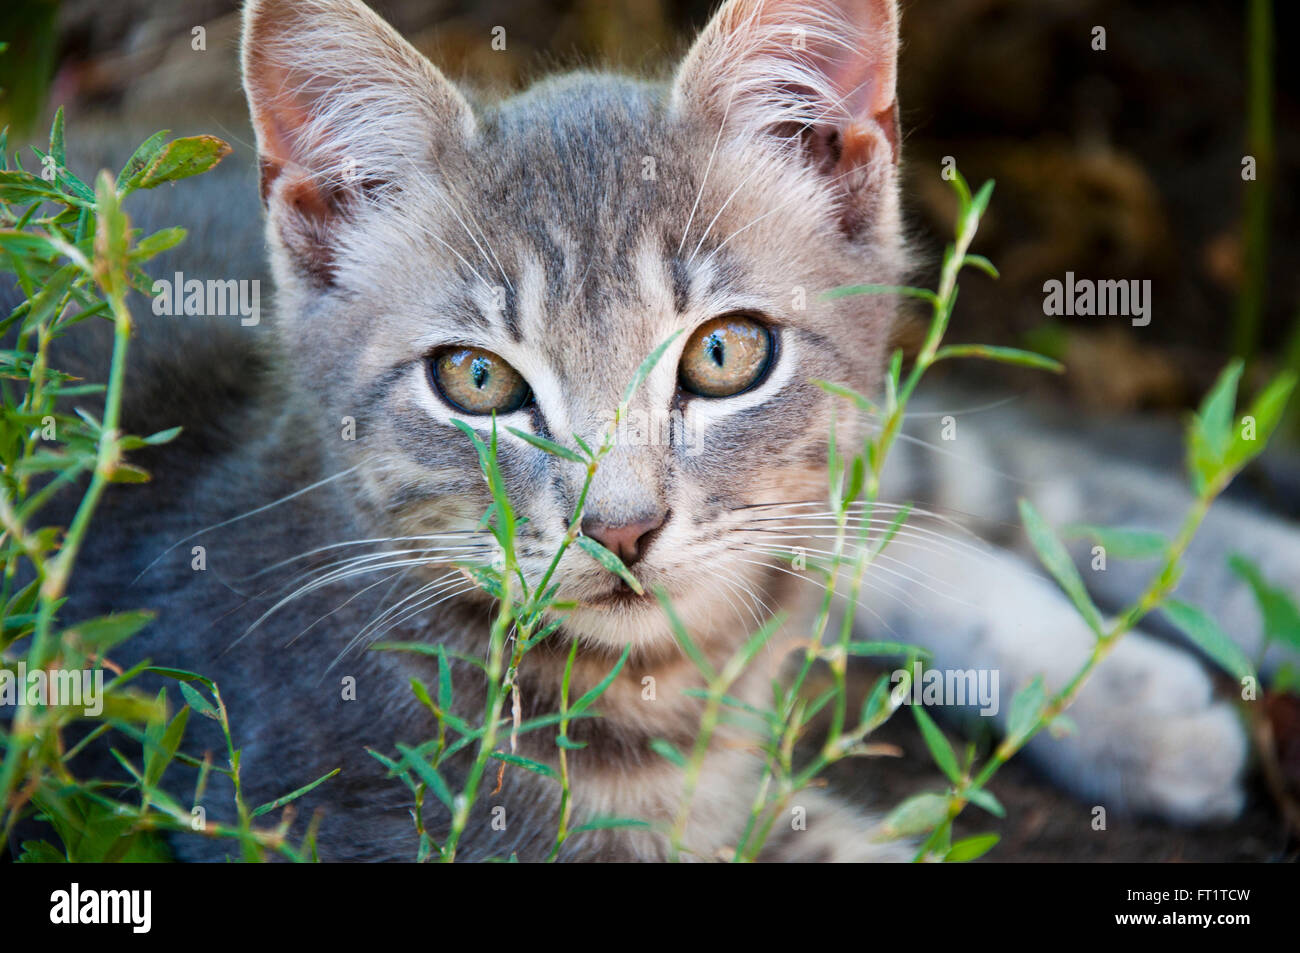 Closeup portrait of one little cute young funny curious kitten with grey striped fur lying in green grass outdoor looking forwar Stock Photo